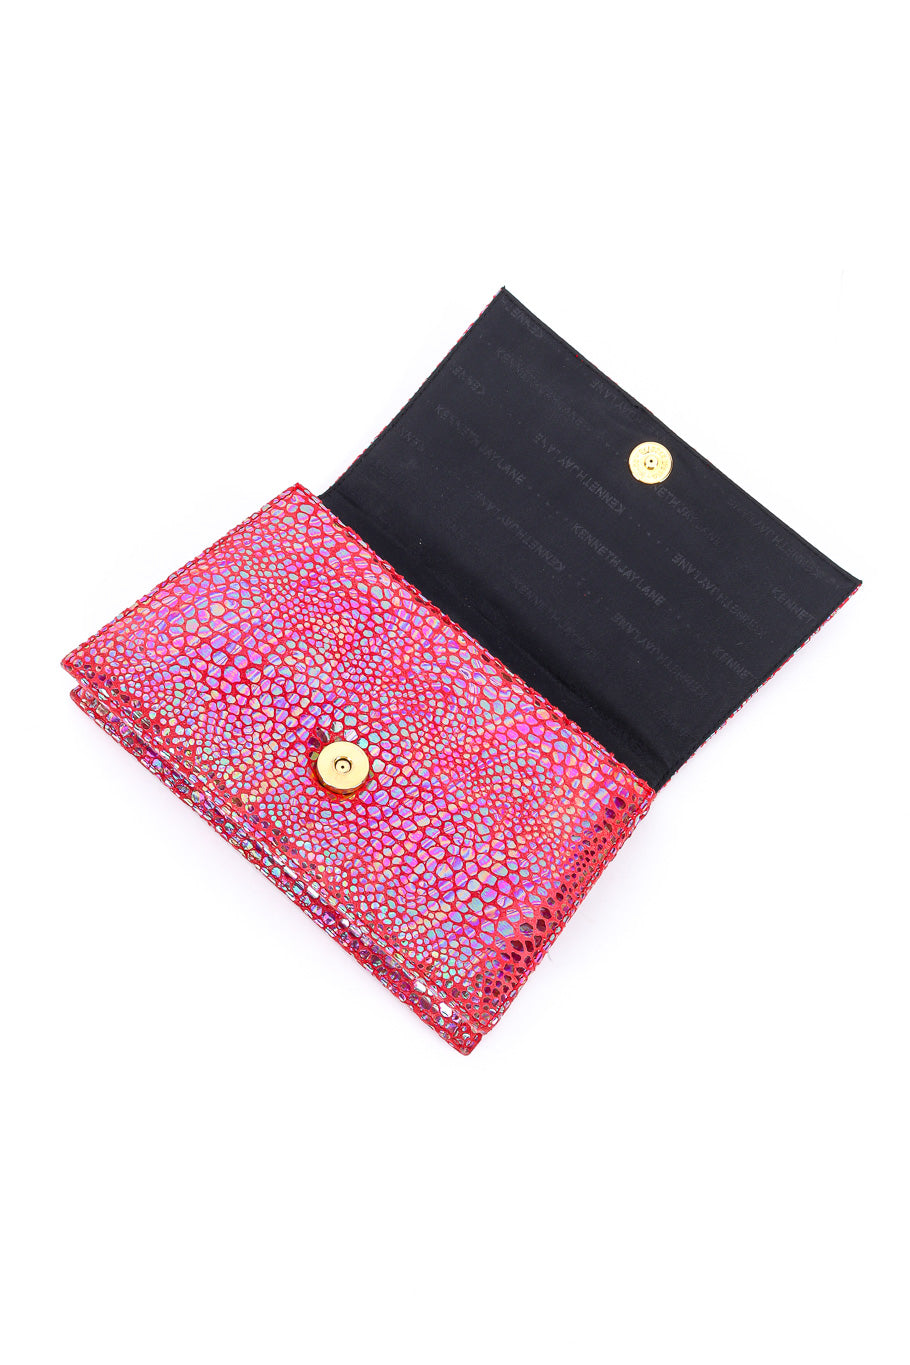 Clutch bag by Kenneth Jay Lane on white background flap open @recessla